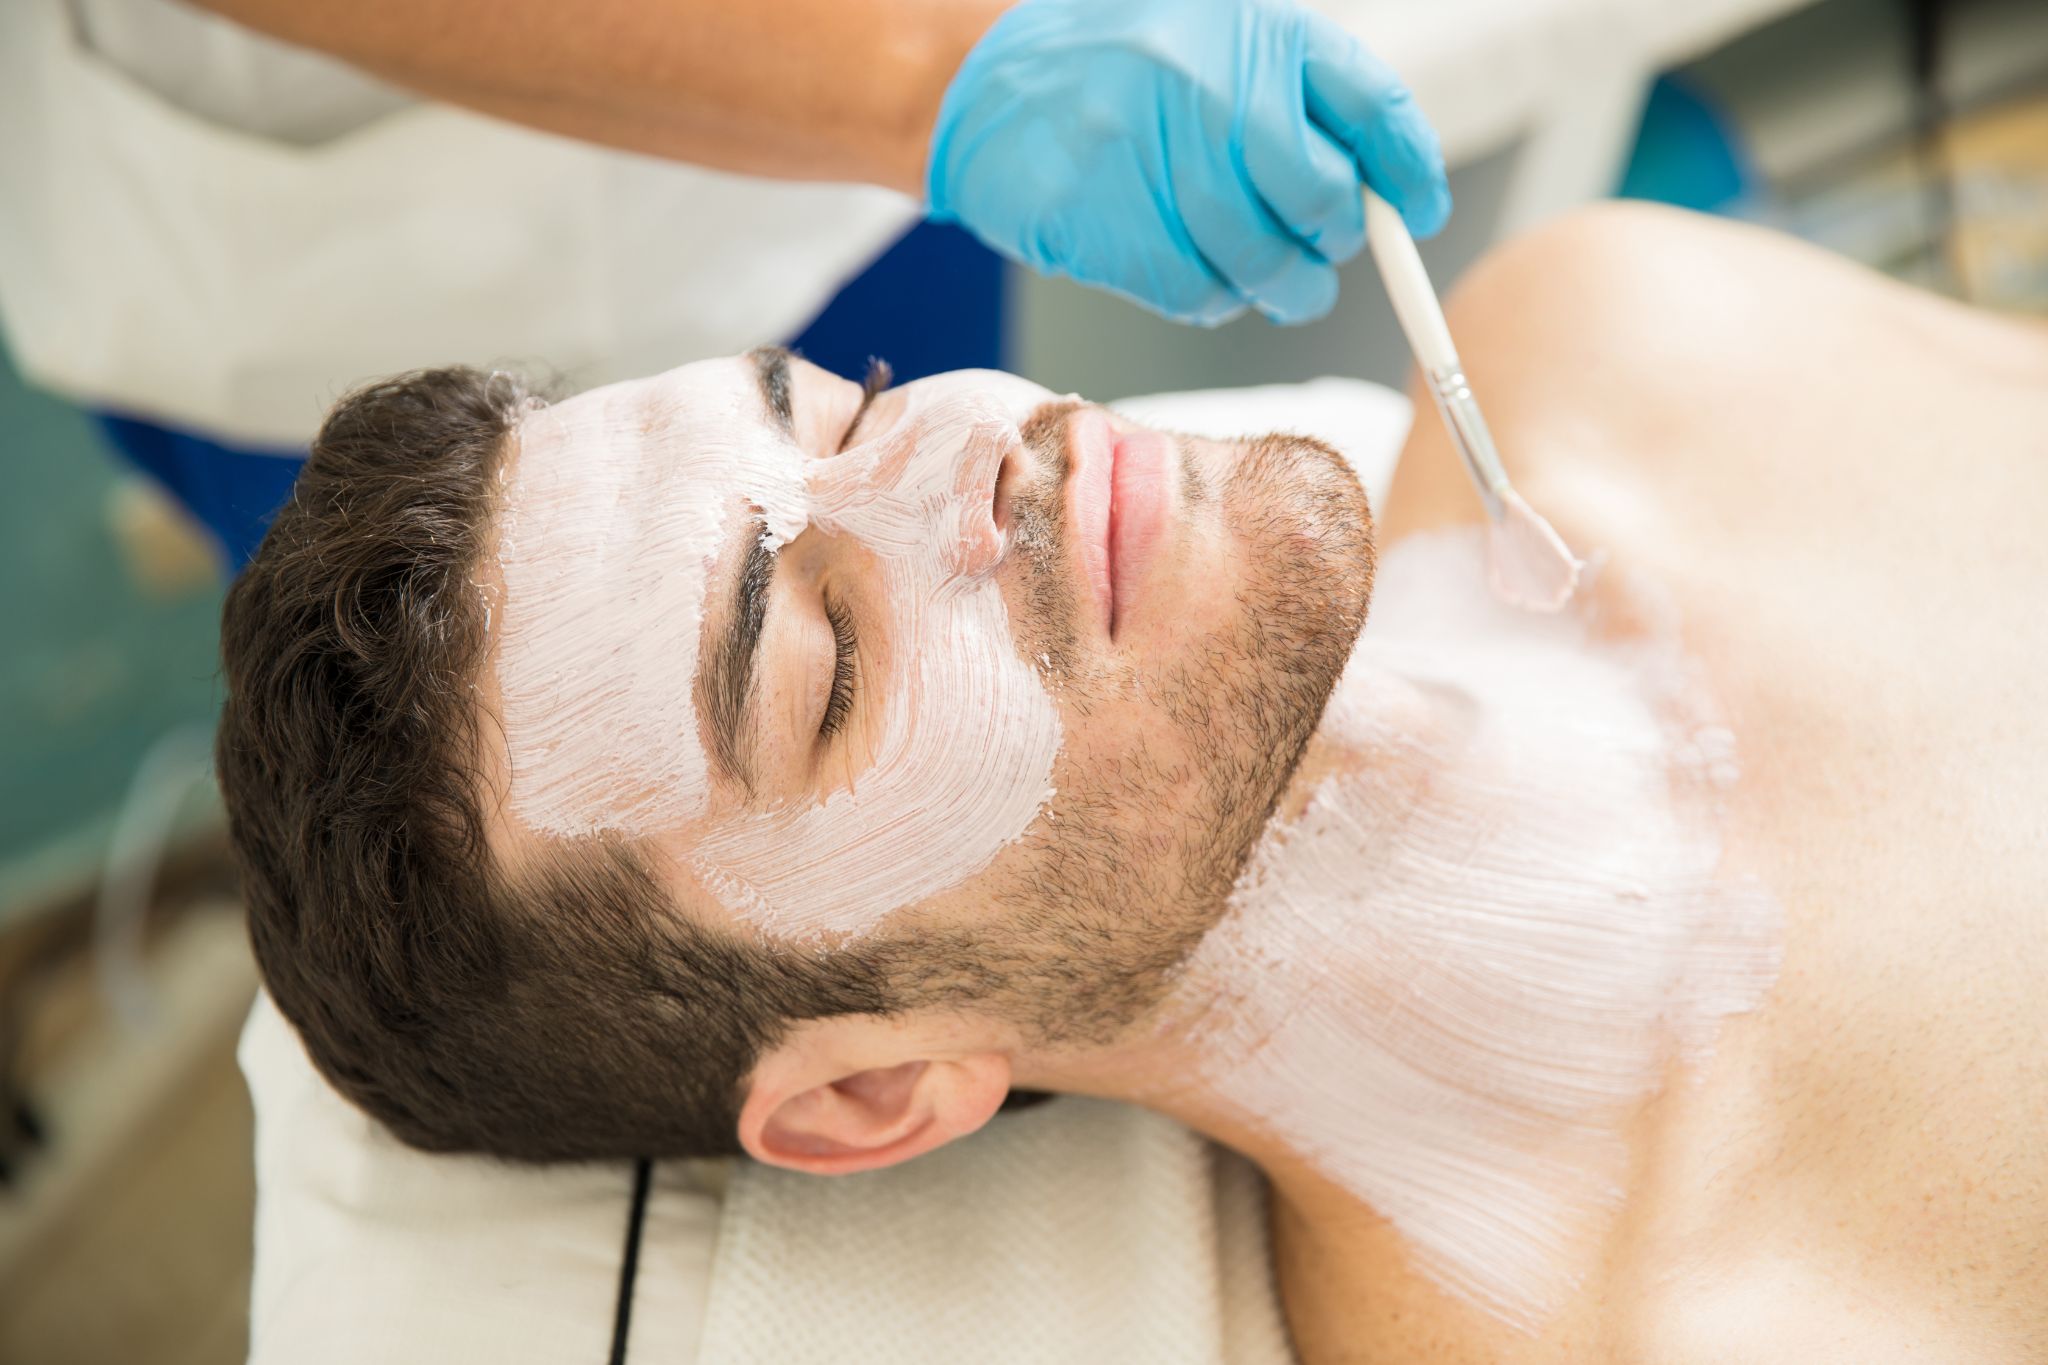 Cooling Spa Treatments for Men to Beat the Heat